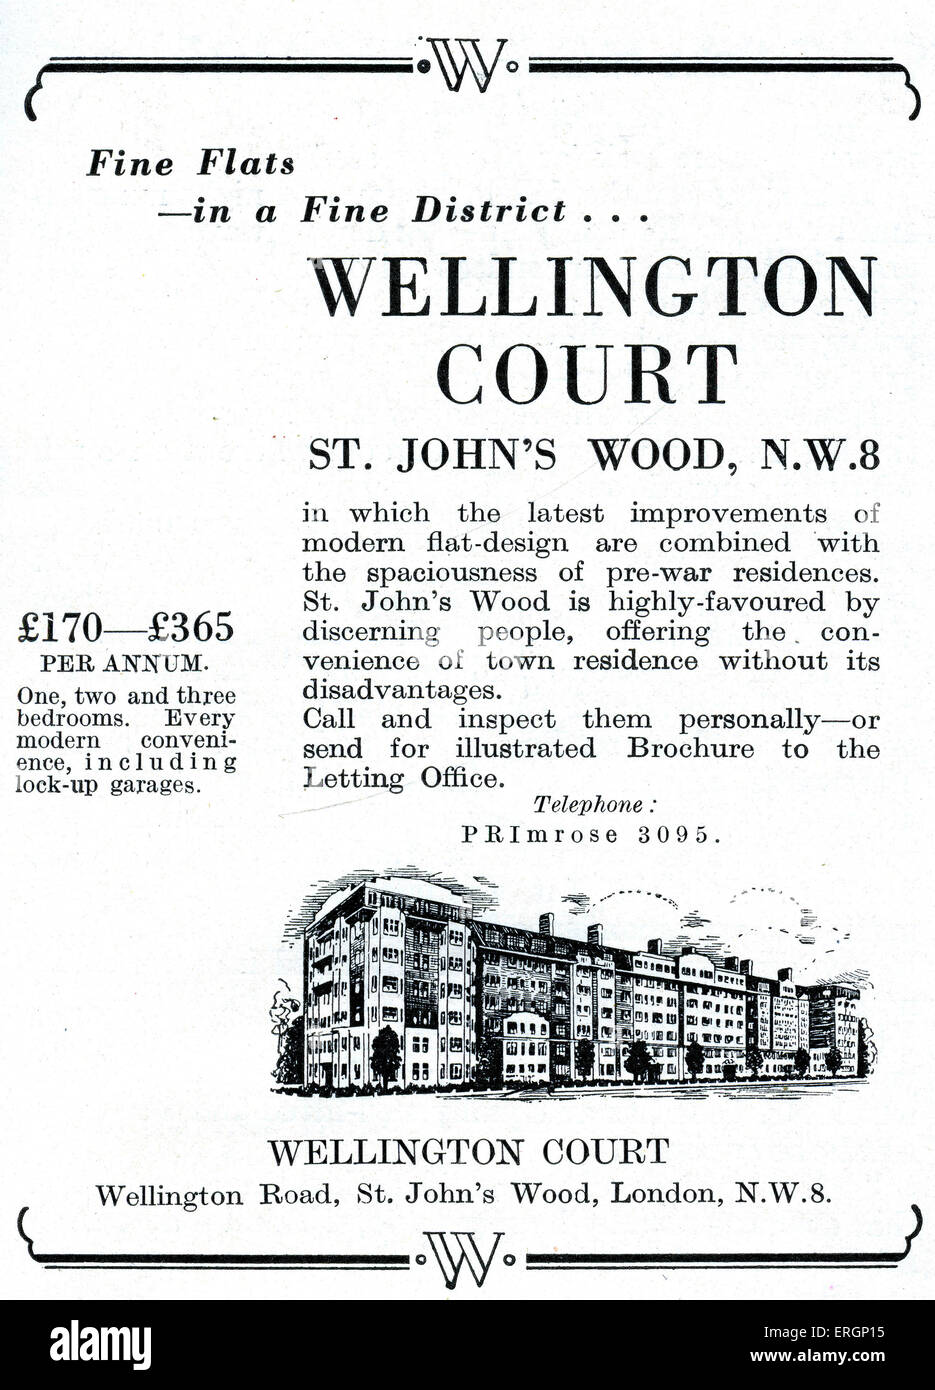 Advertisement for Wellington Court, St Johns Wood NW8. Flats to let in mansion block built before World War Two. Advert reads: ' Fine flats in a fine district..Wellington Court St John's Wood, NW8 in which the latest improvememnts of modern flat design ae combined with spaciousness of pre-war residences, St John's Wood is highly-favoured by discerning people…£170 - £365 per annum One, two and three bedrooms. Every modern convenience including lock-up garages.' Stock Photo